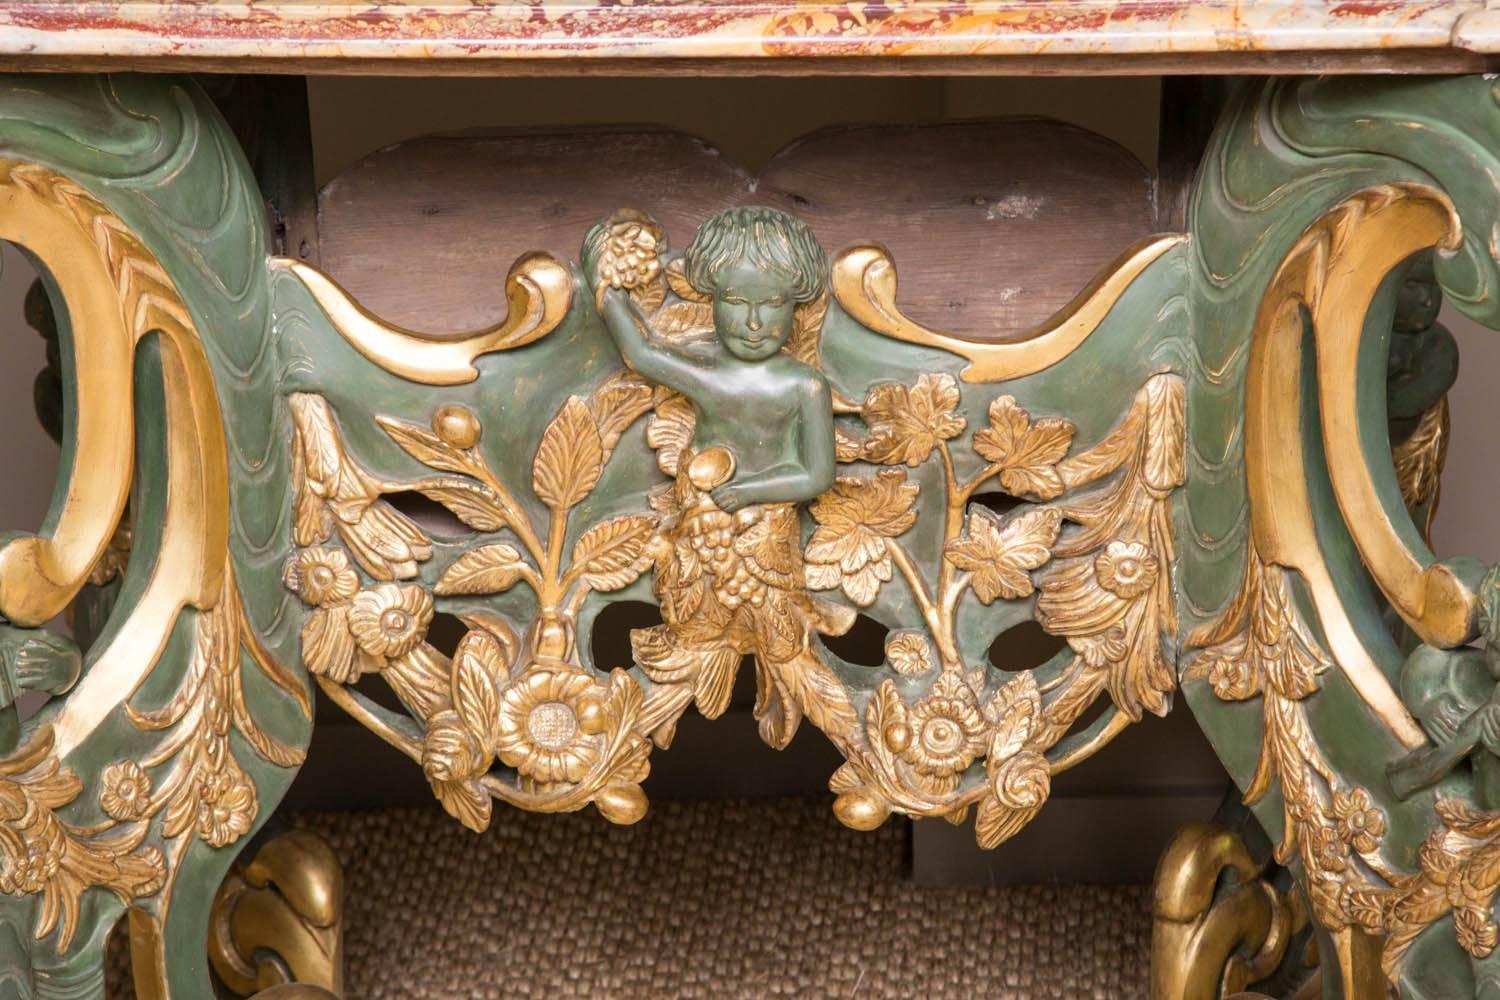 A charming Dutch late 17th century 'Kwab' or centre table. Decorated in a green painted surface with gilded highlights. Typical Baroque scrolling legs and decoration. The marble-top later and associated. The table dates from circa 1700.